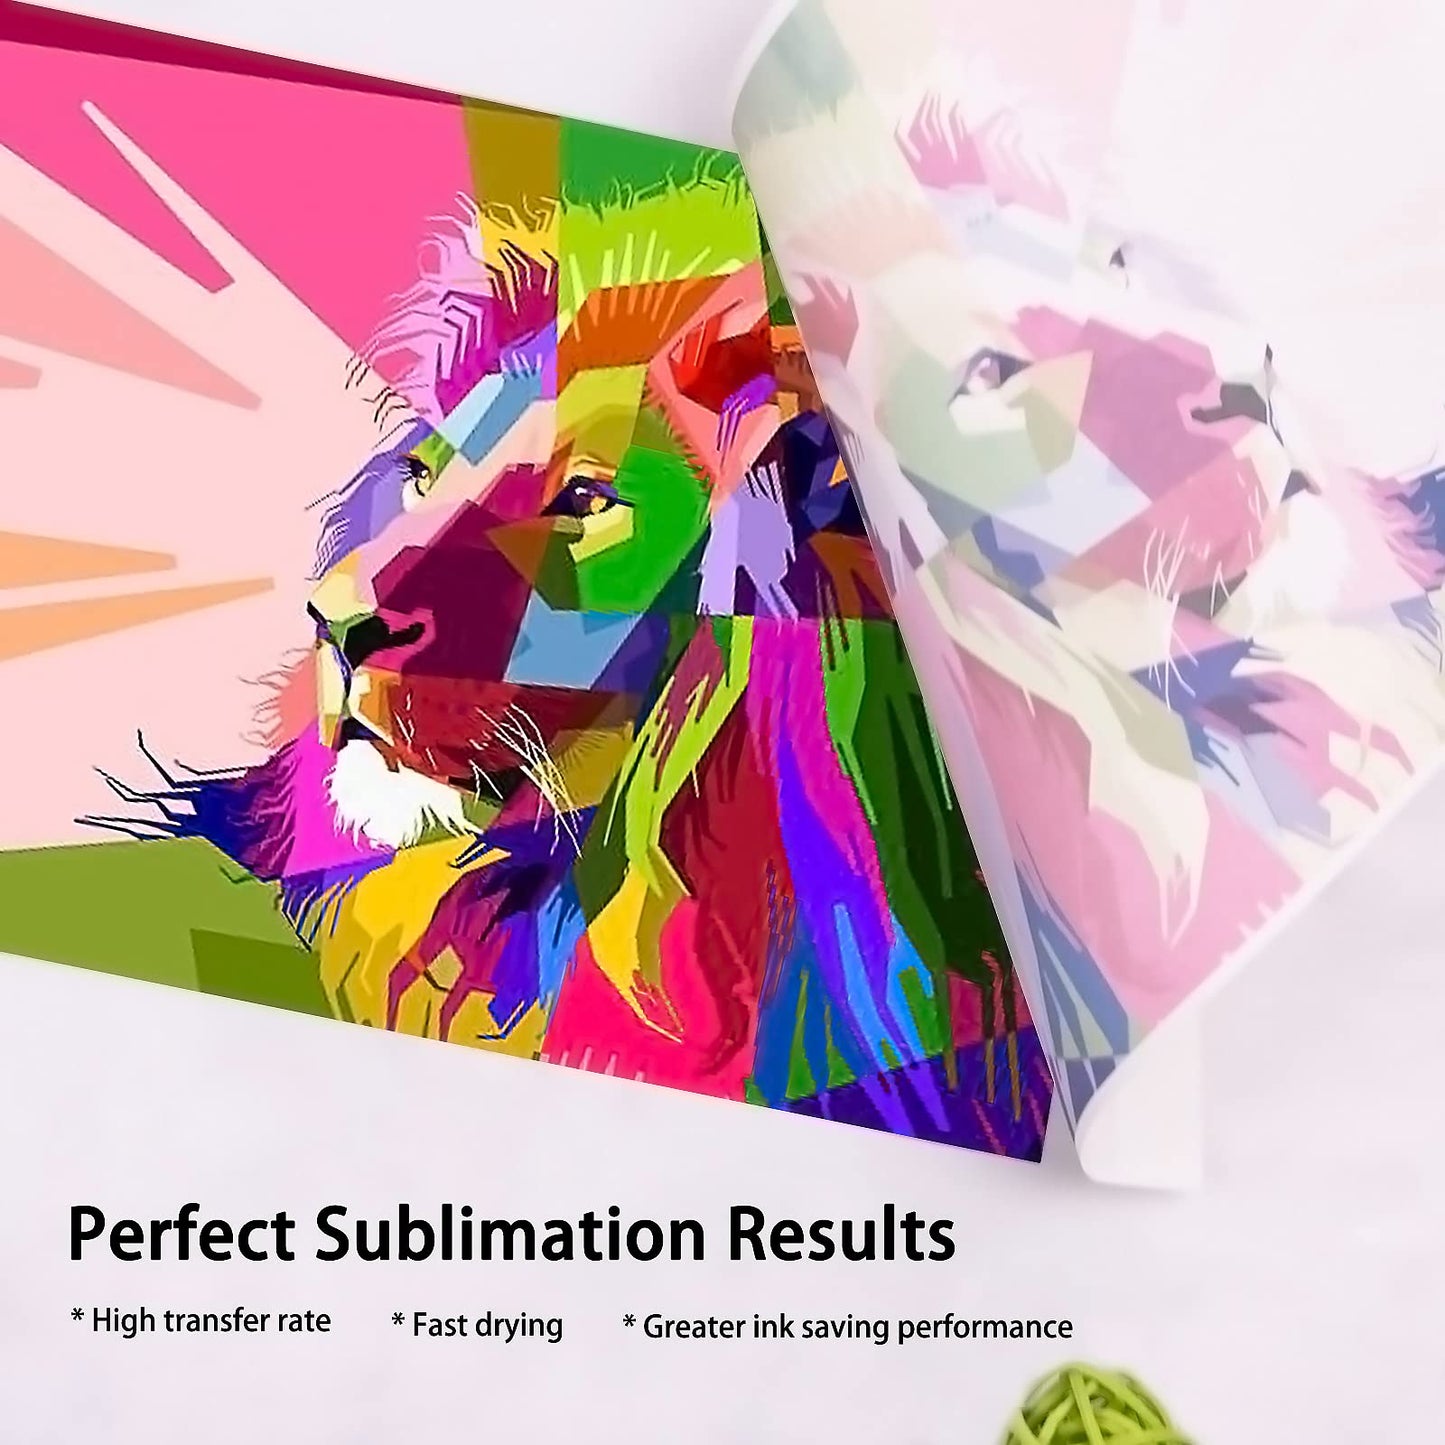 HTVRONT Sublimation Paper 8.5 x 11 inches - 150 Sheets +12" X 20FT Clear HTV Vinyl for Sublimation